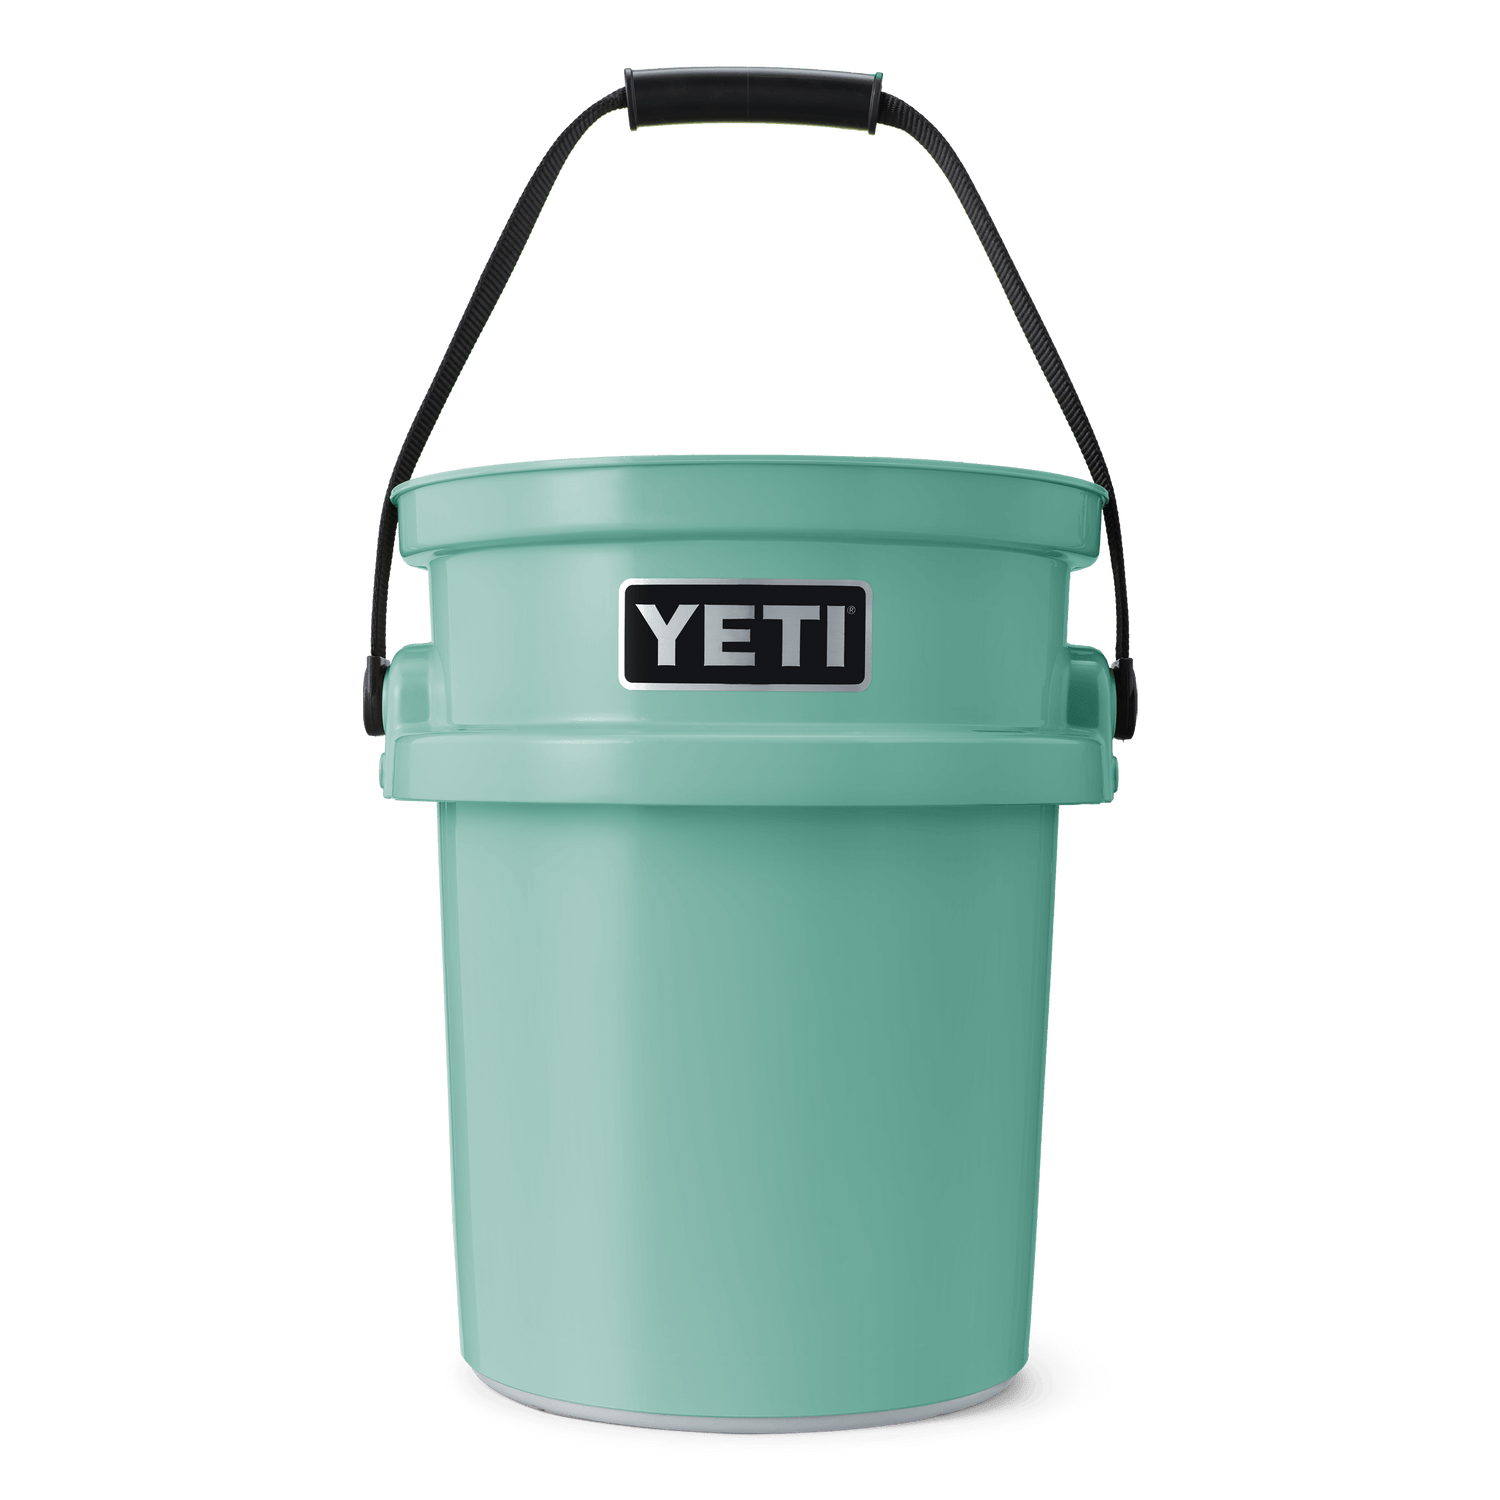 Great deal on Yeti 5 Gallon Water Jug : r/YetiCoolers